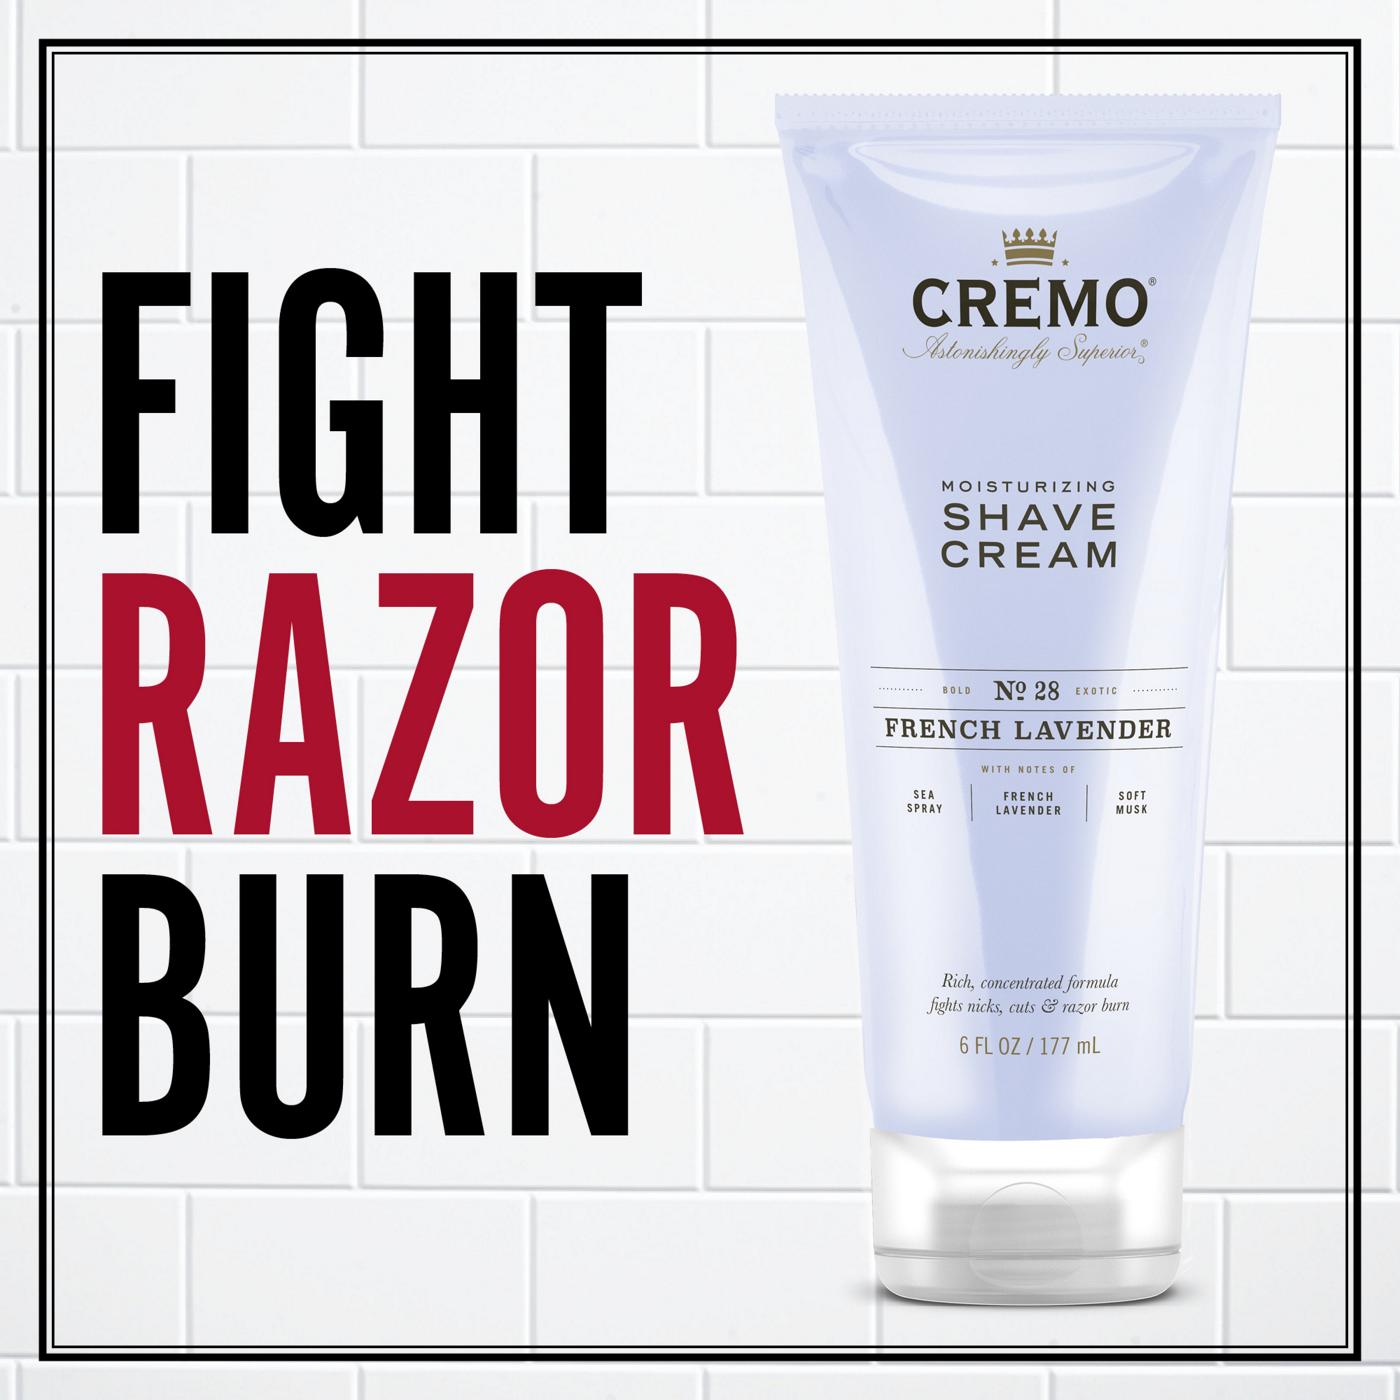 Cremo Shave Cream - French Lavender; image 7 of 7